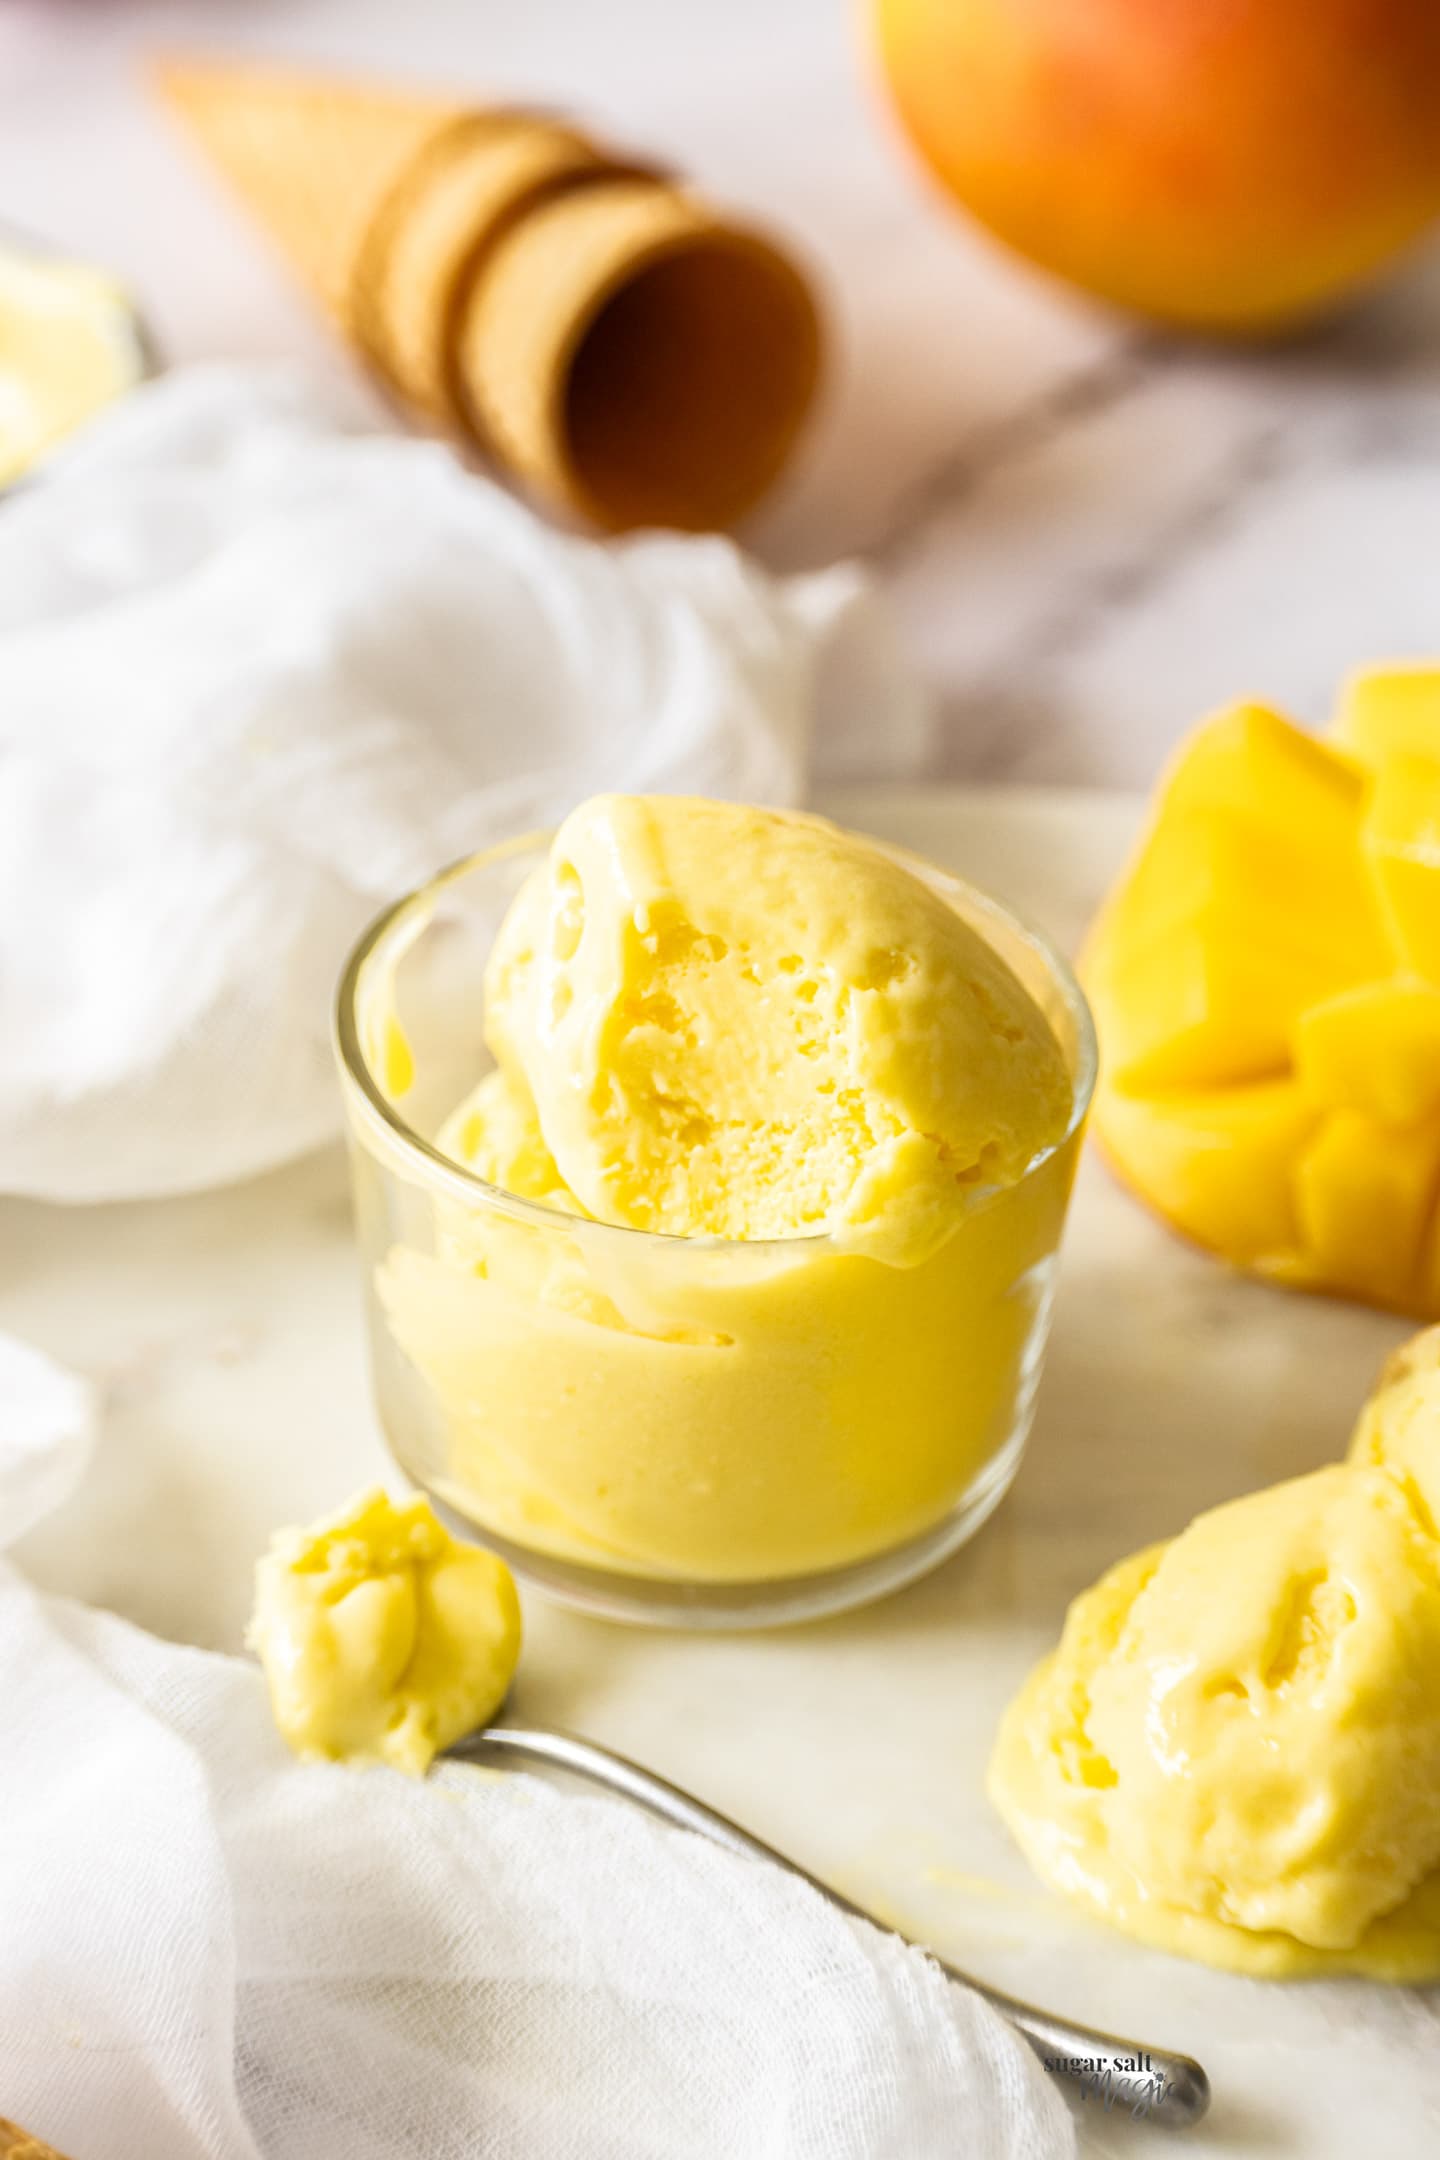 A small glass bowl filled with mango gelato.